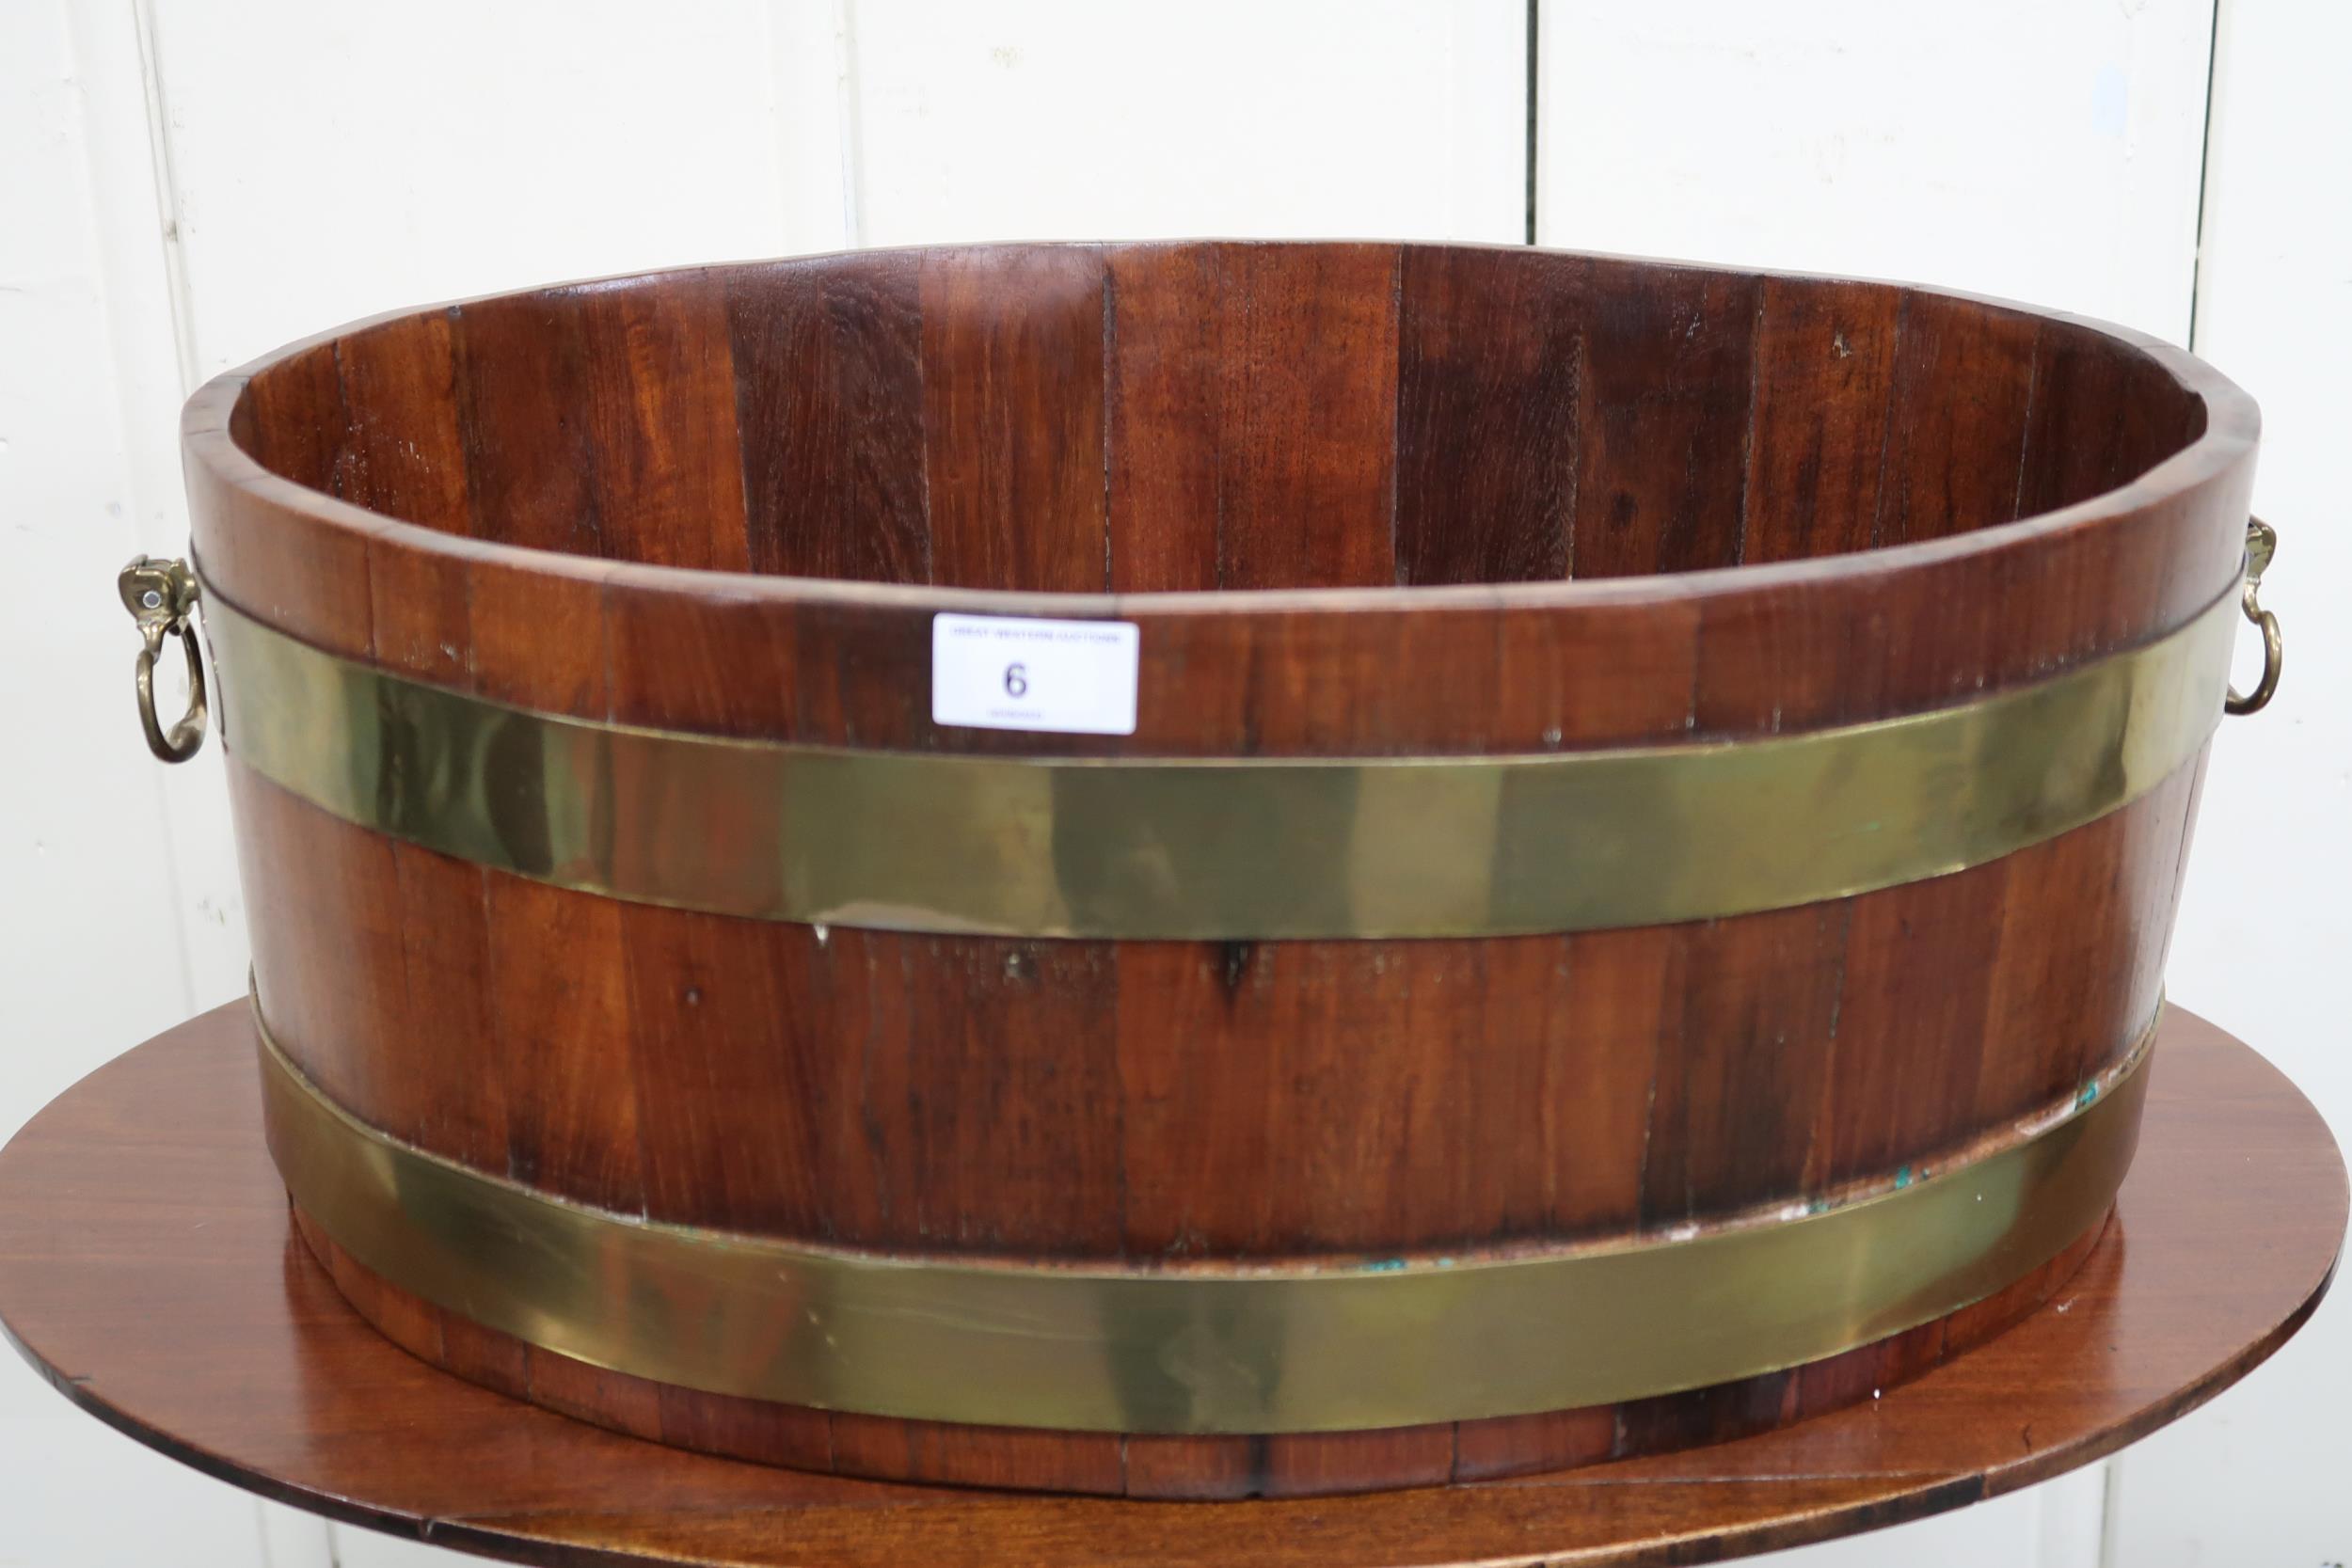 A 20th century oval teak and brass bound planter with twin brass handles, 21cm high x 55cm wide x - Image 2 of 2